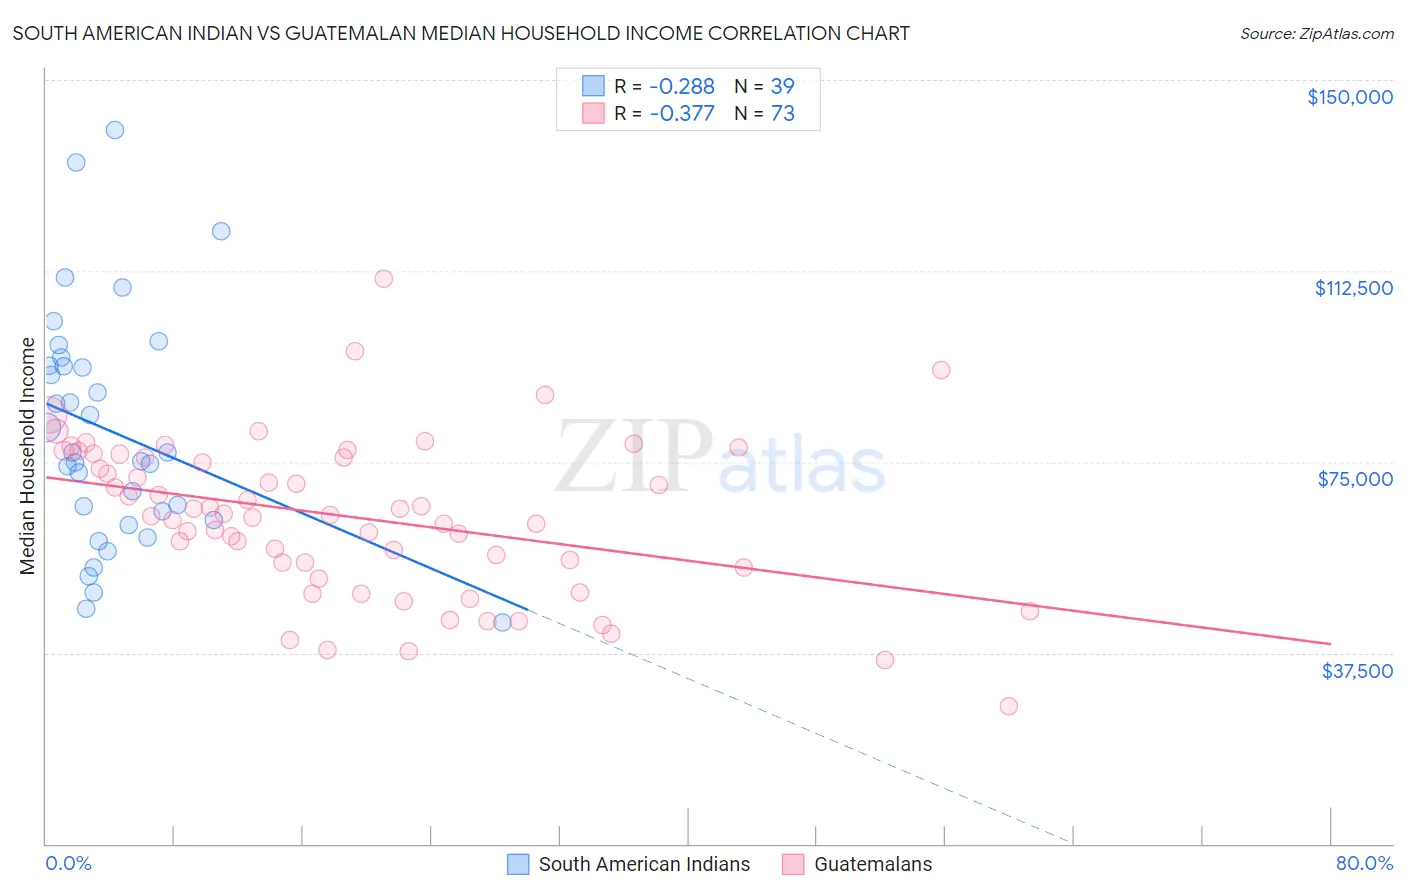 South American Indian vs Guatemalan Median Household Income